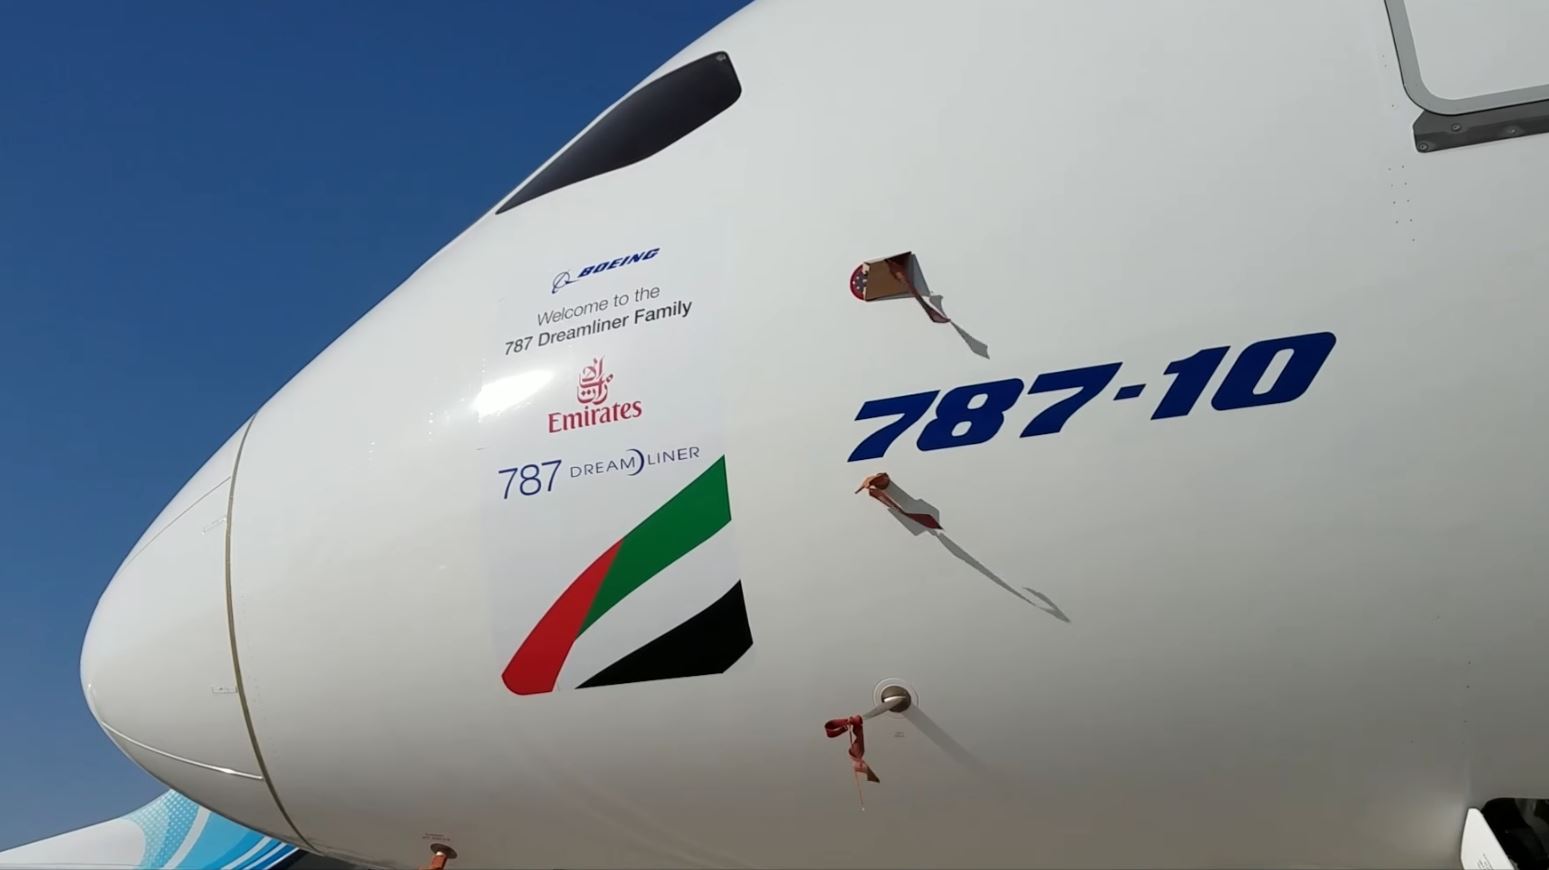 Boeing’s highlights from the 2017 Dubai Airshow